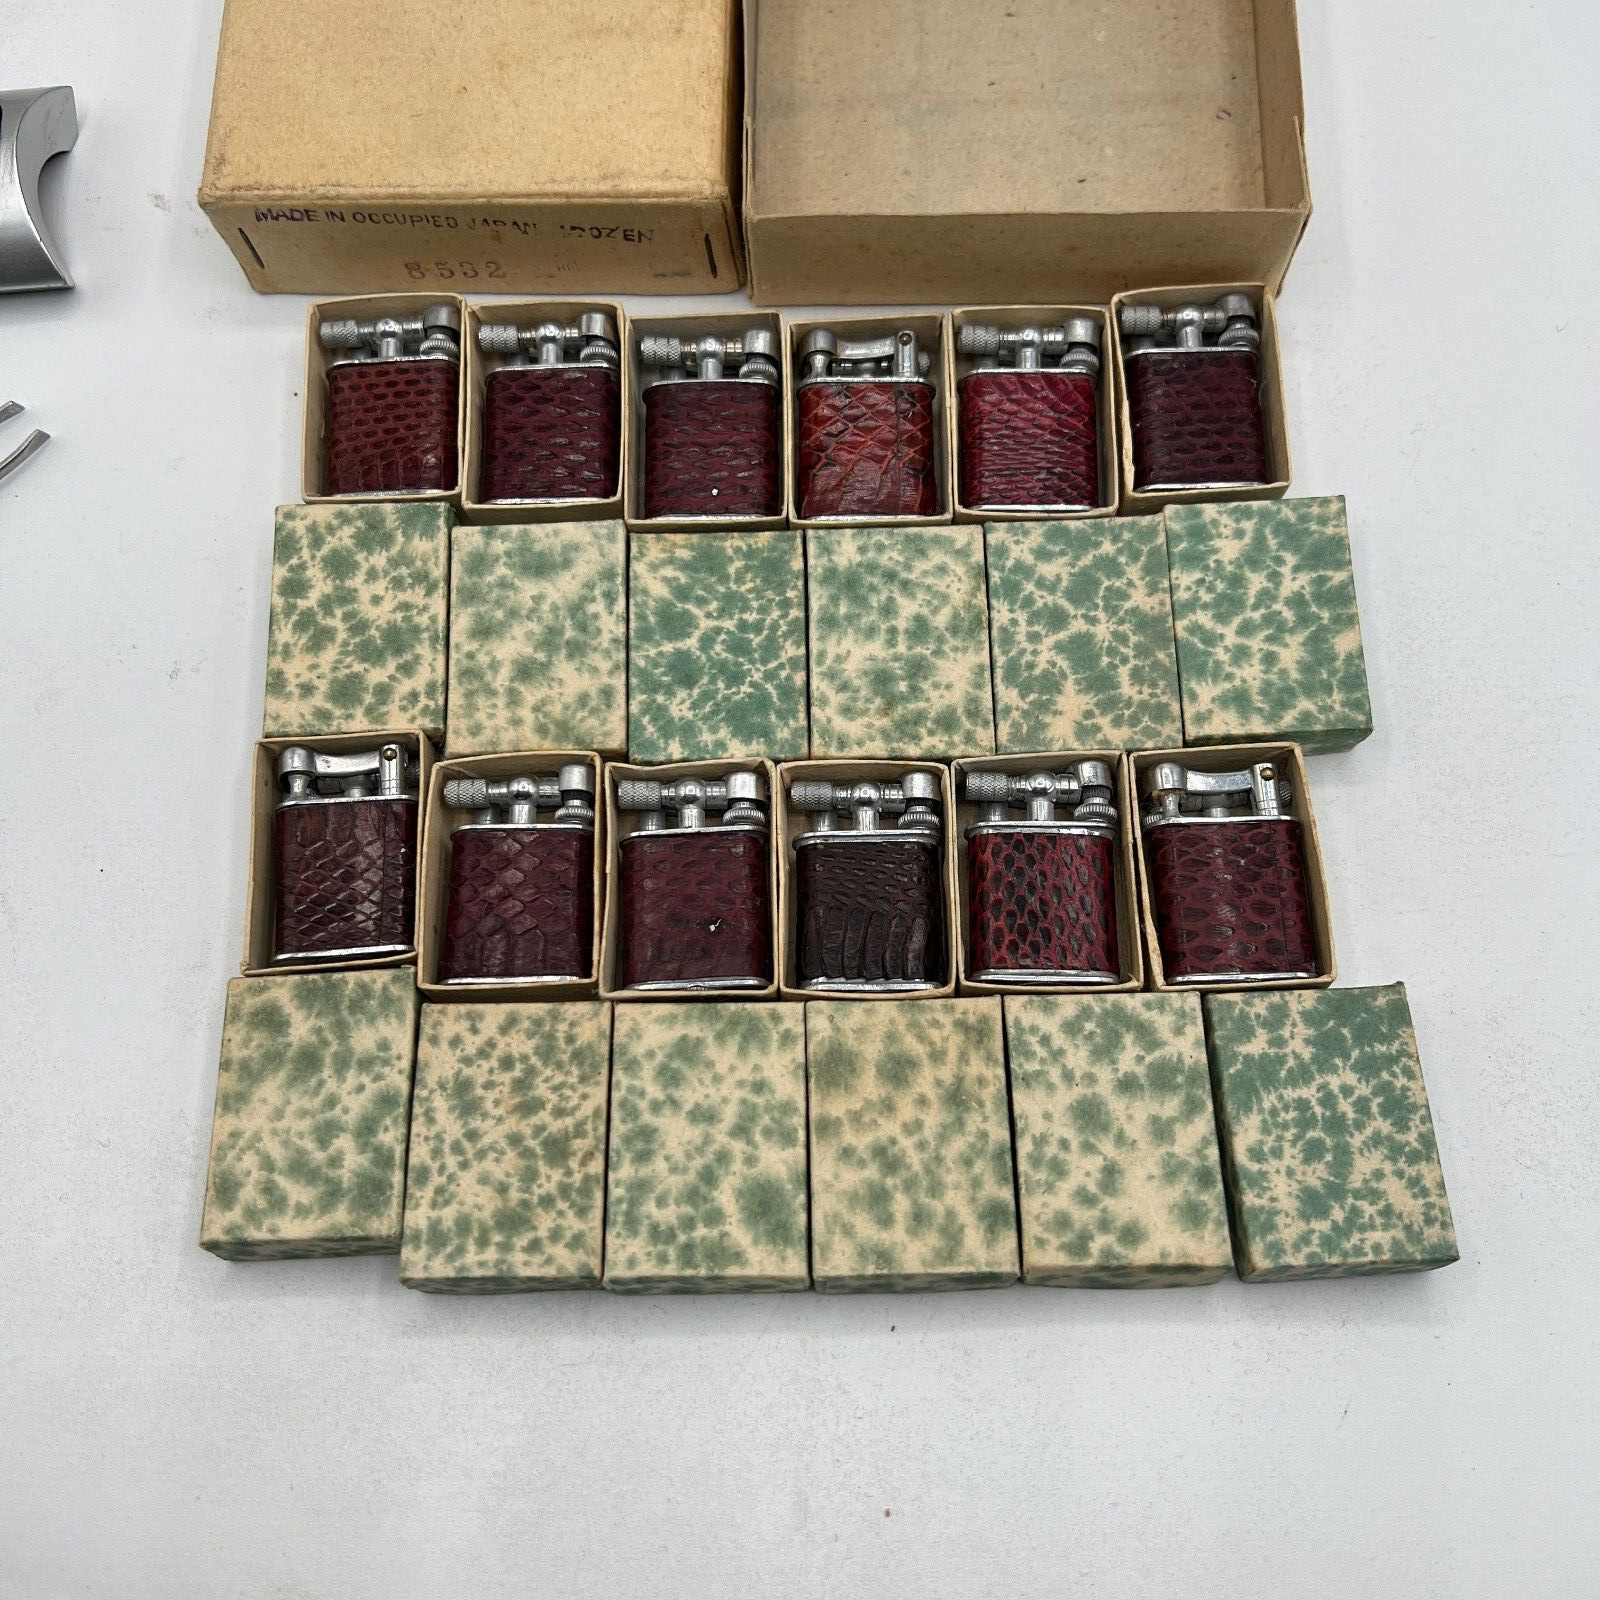 12 Occupied Japan Mini Lift Arm Lighters In Original Boxes NOS